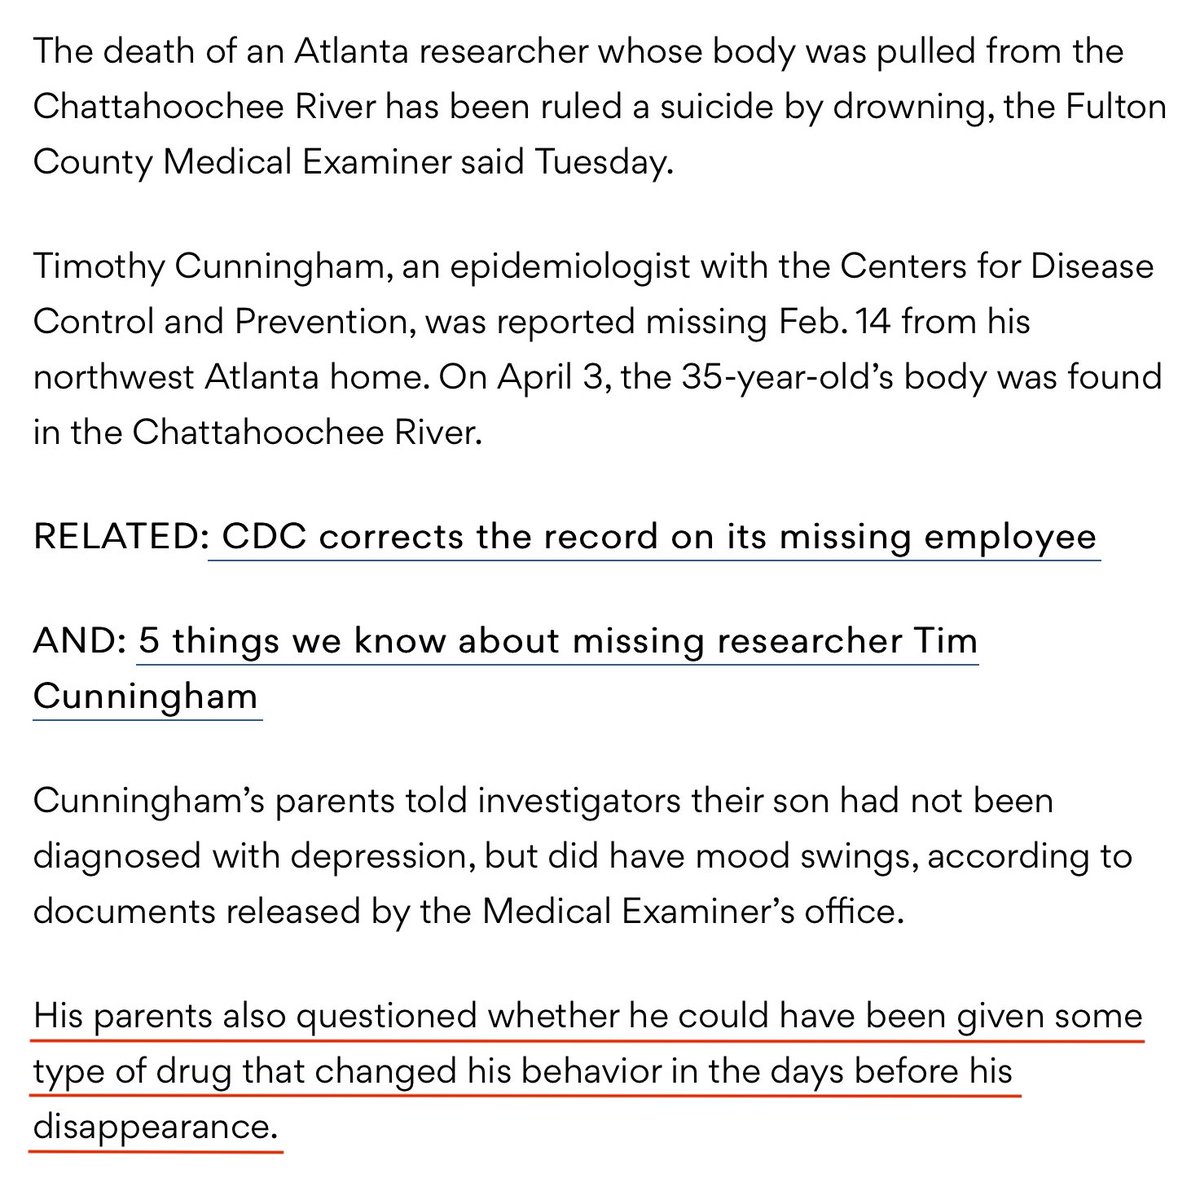 Timothy Cunningham's Parents Question Wether He Could Have Been Given Some Type Of DRUG That Changed His Behaviour In The Days Before His Disappearance. All Belongings Found At Atlanta Home, Wallet, Cellphone, SUV And Dog. https://www.ajc.com/news/breaking-news/breaking-cdc-researcher-death-ruled-suicide-drowning/gWYu2ijwNkORvOtg6pVz0M/ #QAnon  #VaccineDeepState  @potus